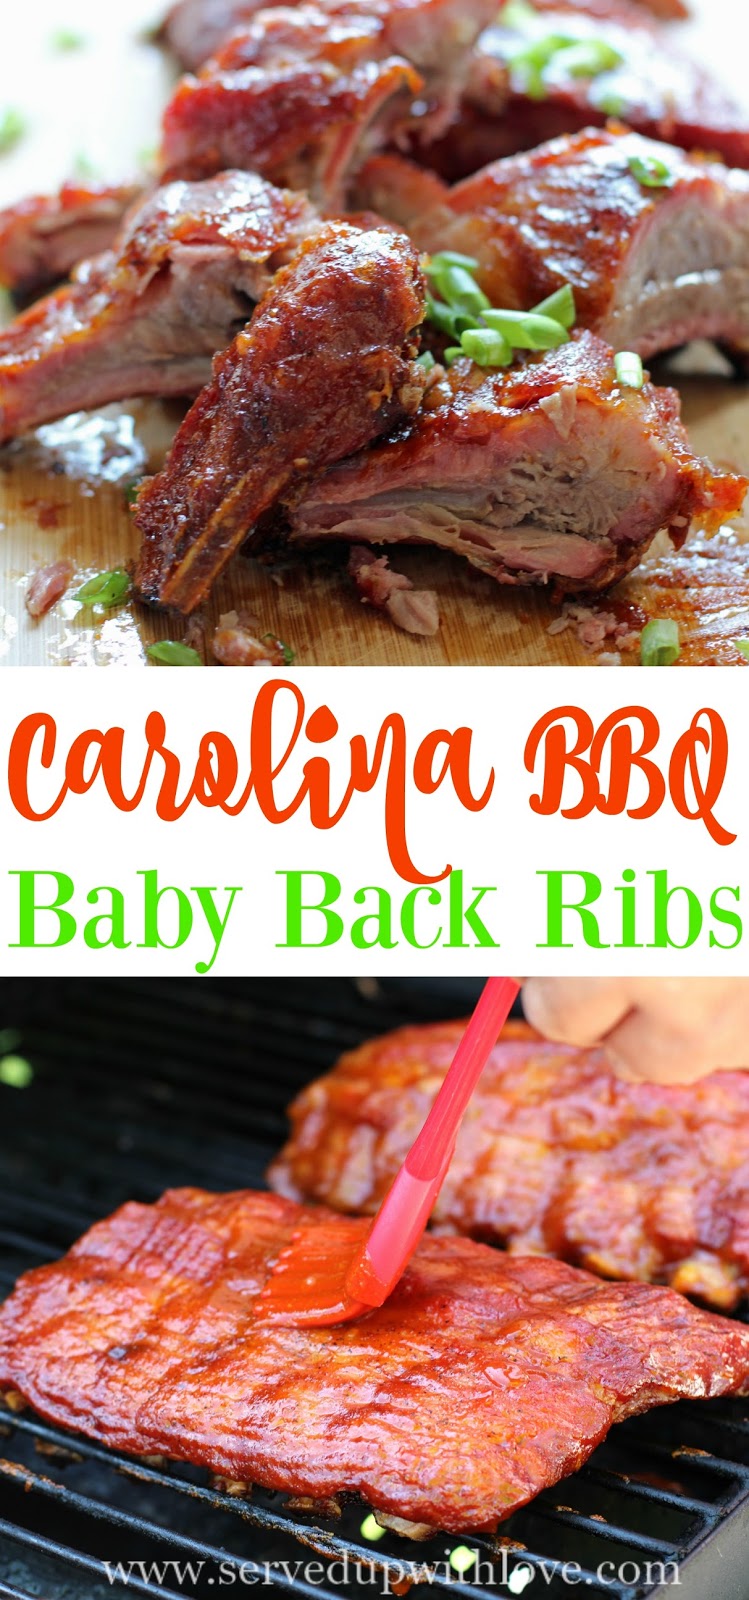 Served Up With Love: Tangy Carolina BBQ Baby Back Ribs